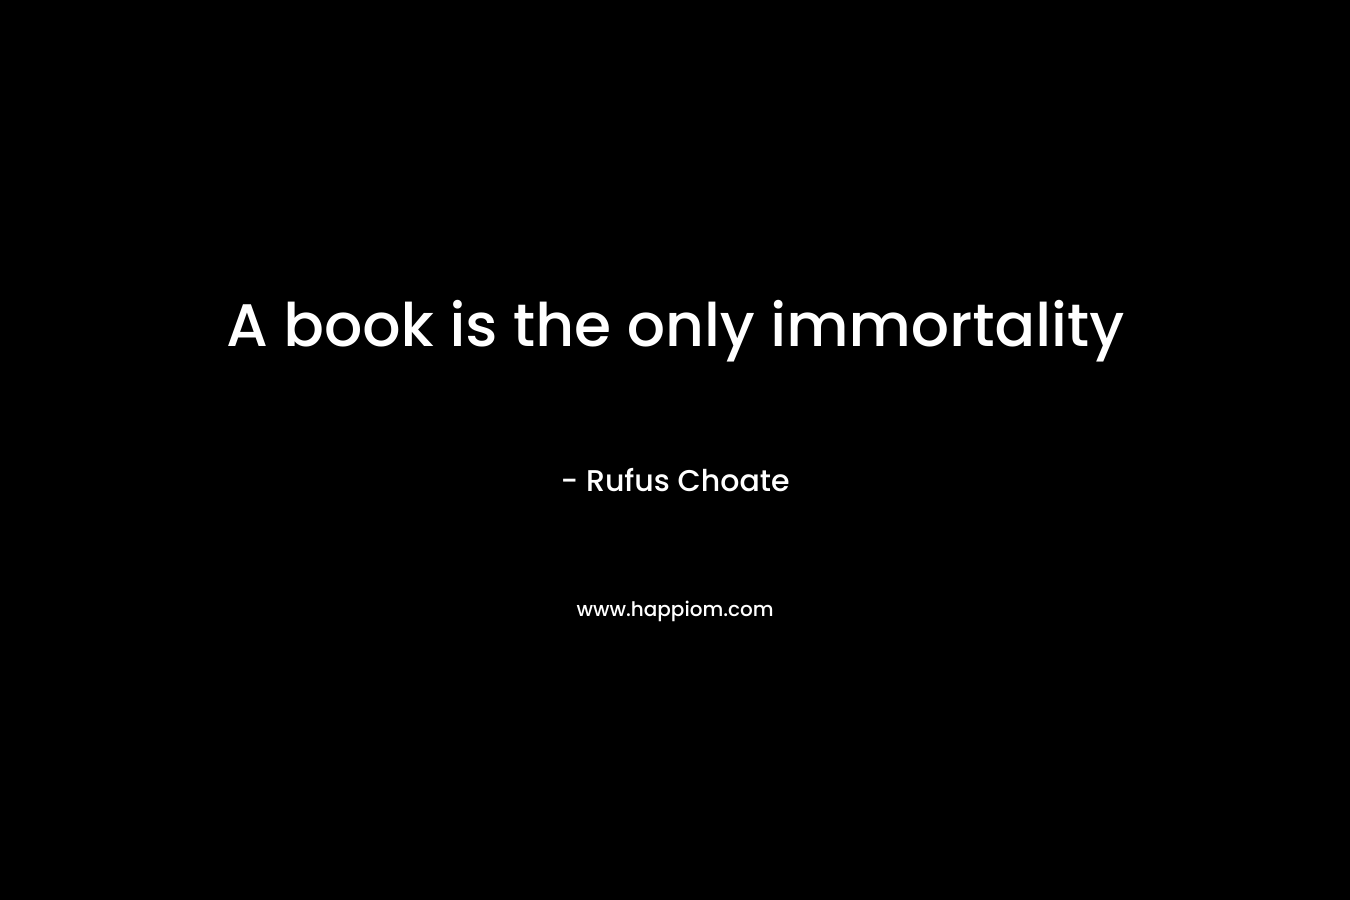 A book is the only immortality